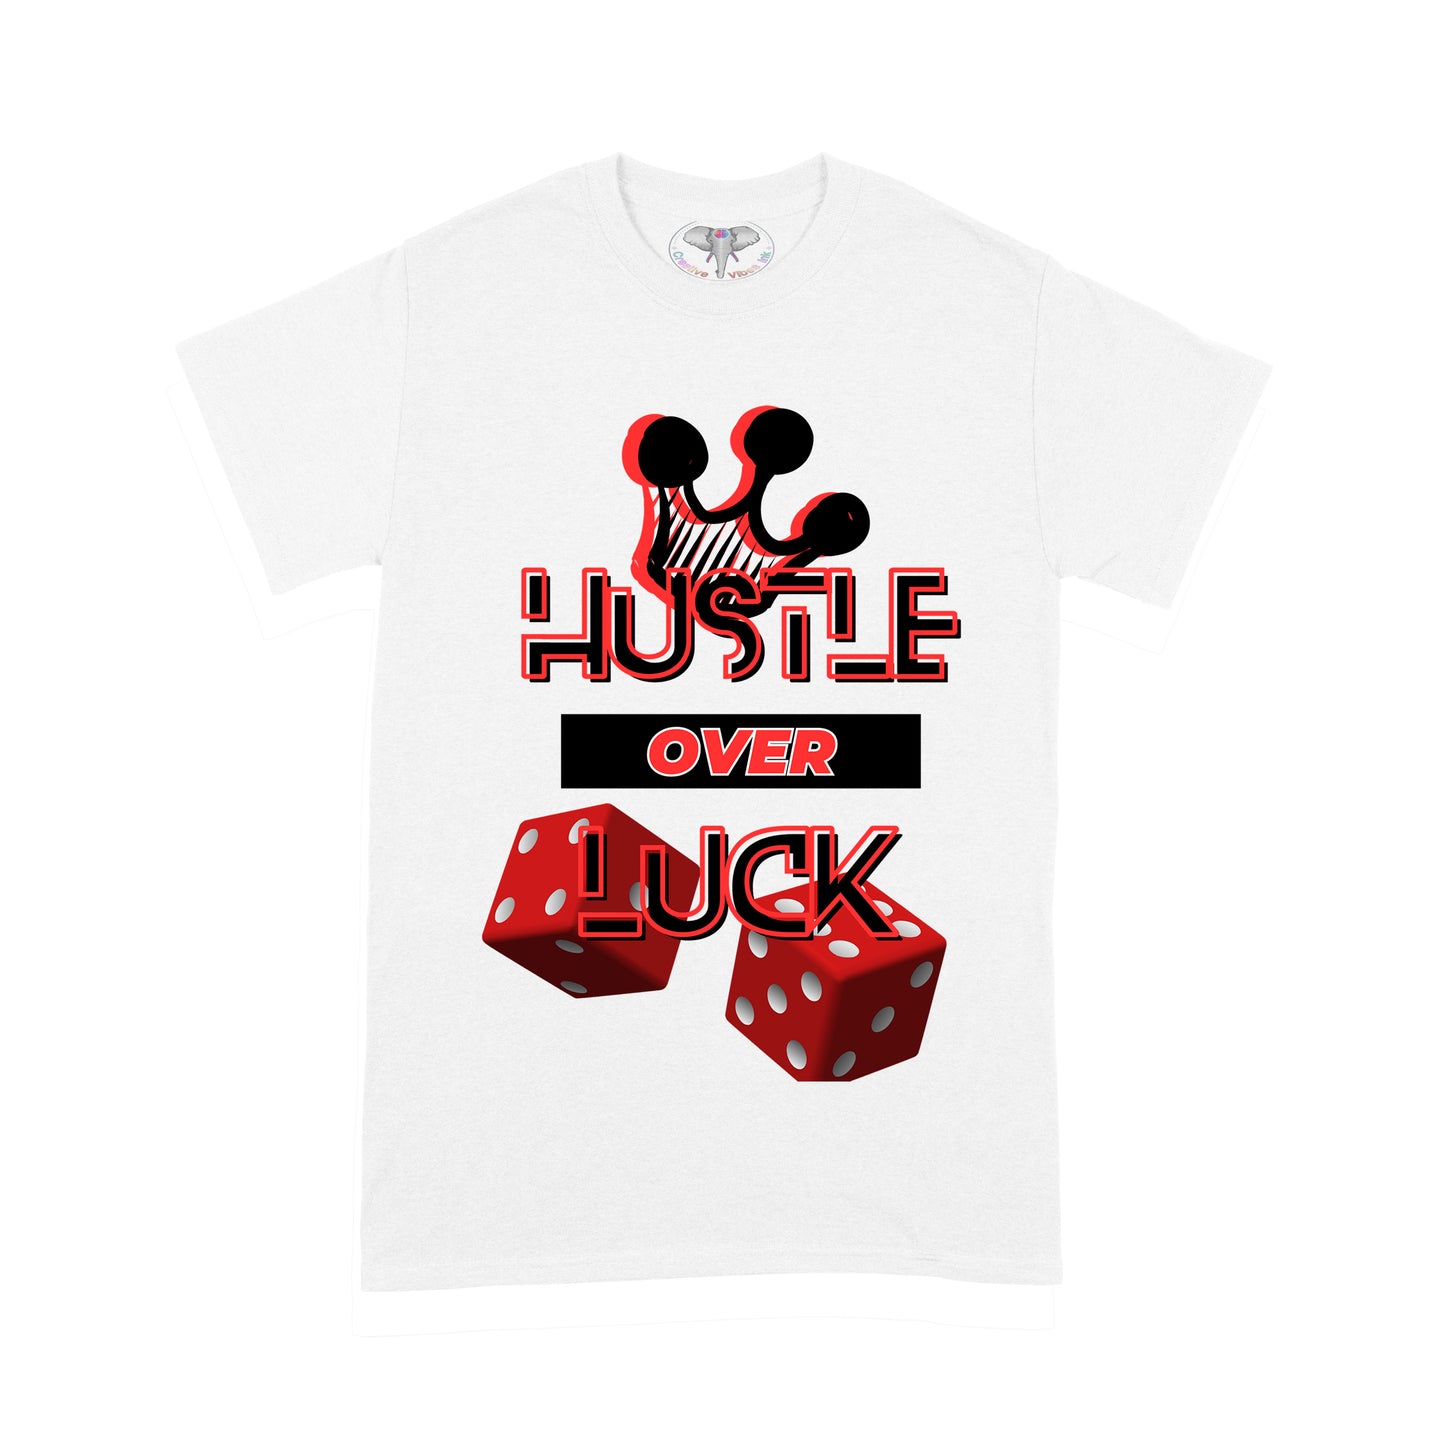 Hustle Over Luck Graphic T-shirt